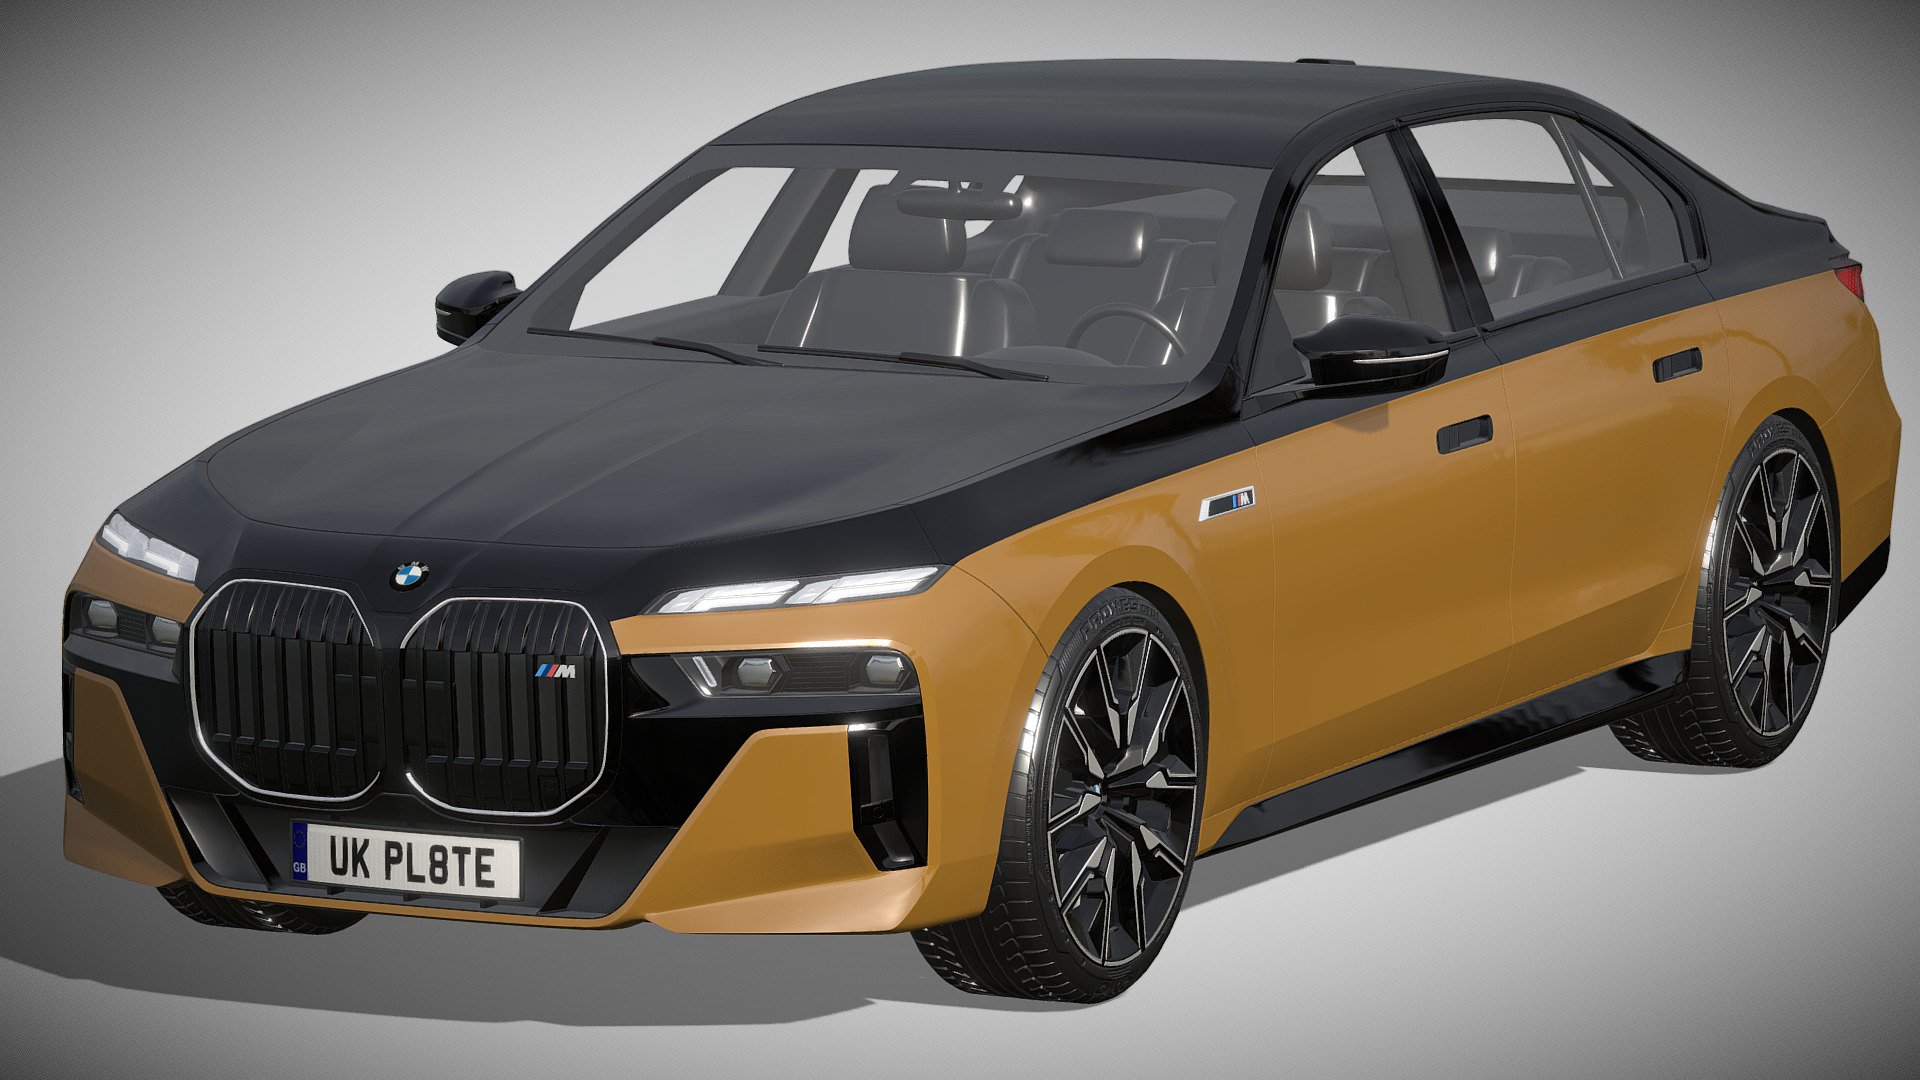 BMW i7 M70

https://www.bmw.de/de/neufahrzeuge/m/bmw-m760e-xdrive/2023/bmw-7er-m-automobile-ueberblick.html

Clean geometry Light weight model, yet completely detailed for HI-Res renders. Use for movies, Advertisements or games

Corona render and materials

All textures include in *.rar files

Lighting setup is not included in the file! - BMW i7 M70 - Buy Royalty Free 3D model by zifir3d 3d model